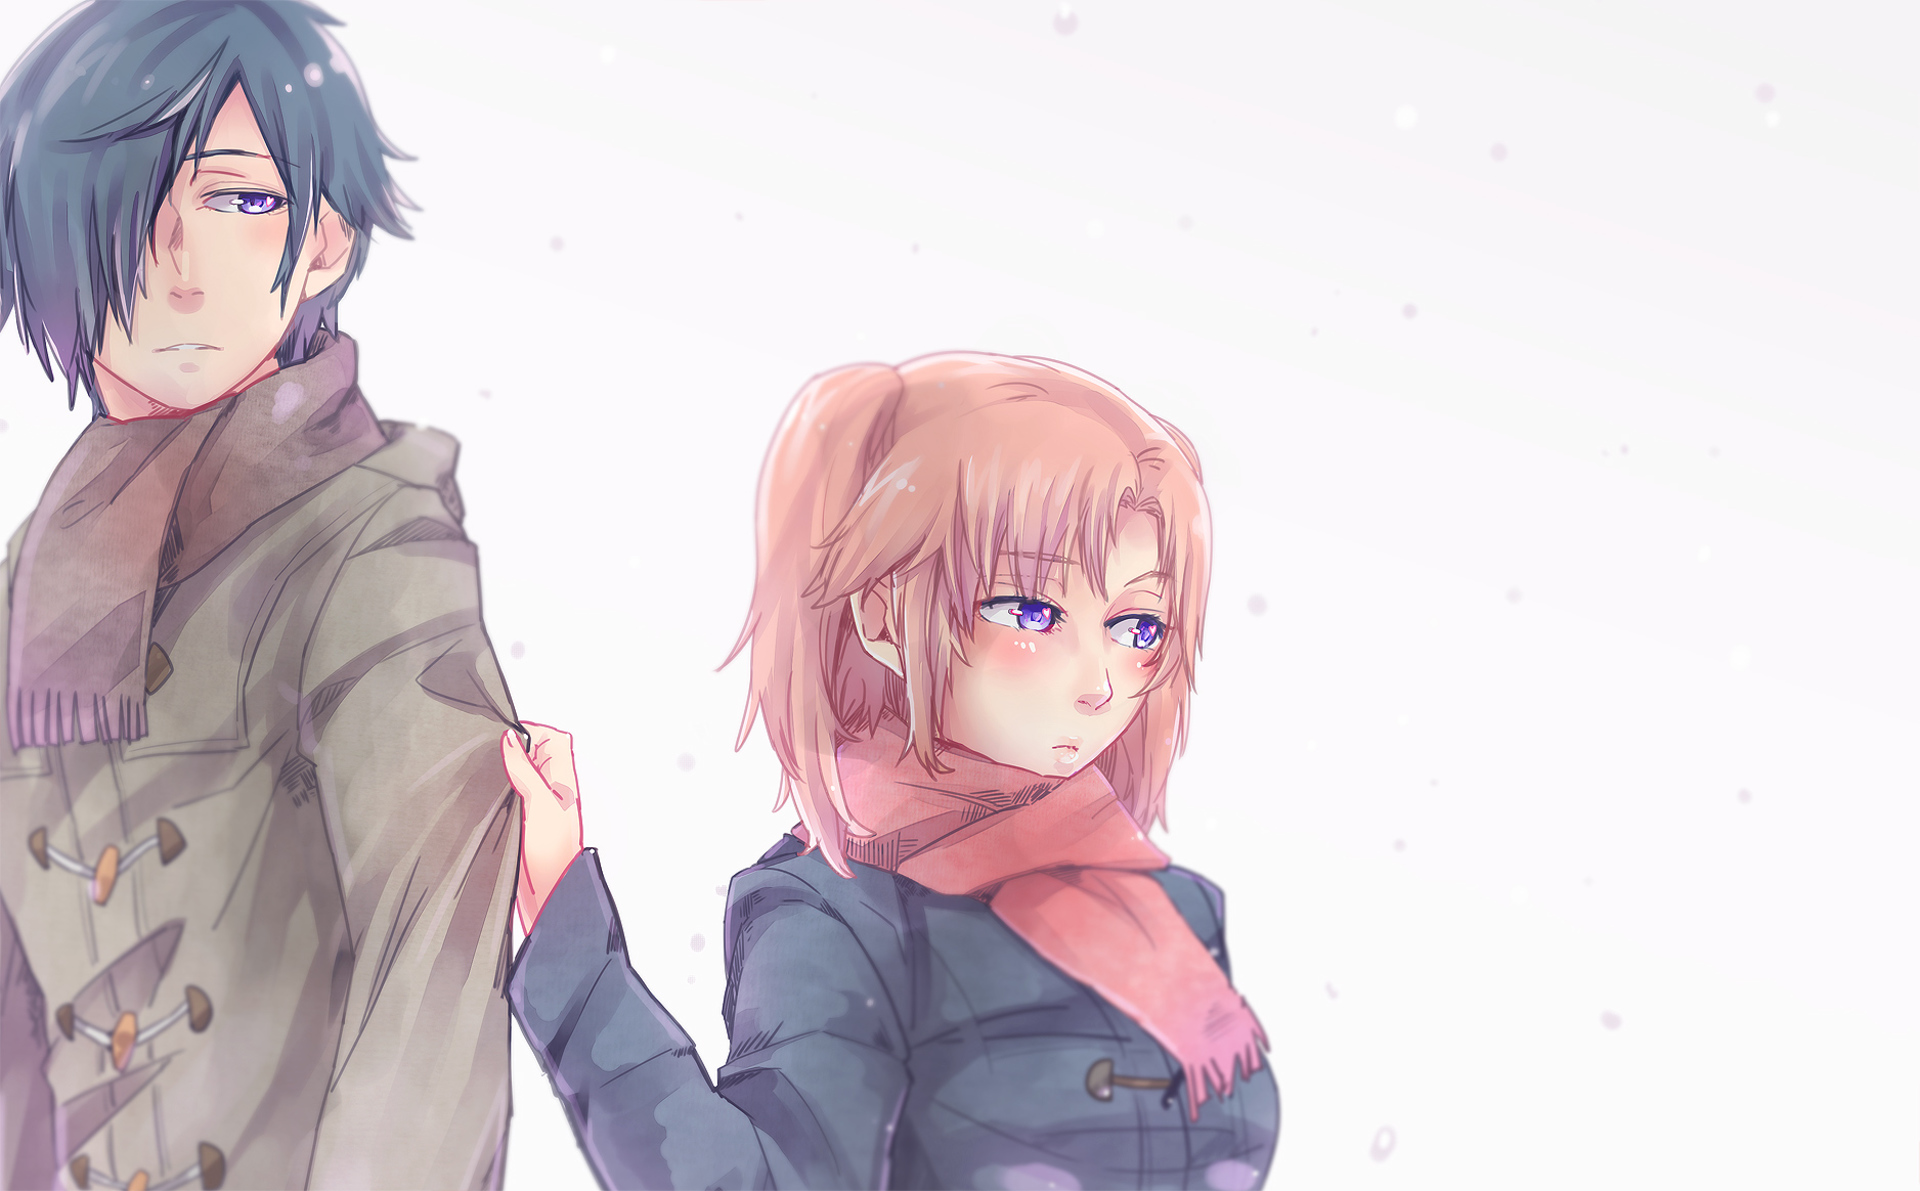 Engaged to the Unidentified HD Wallpaper by よむぎ